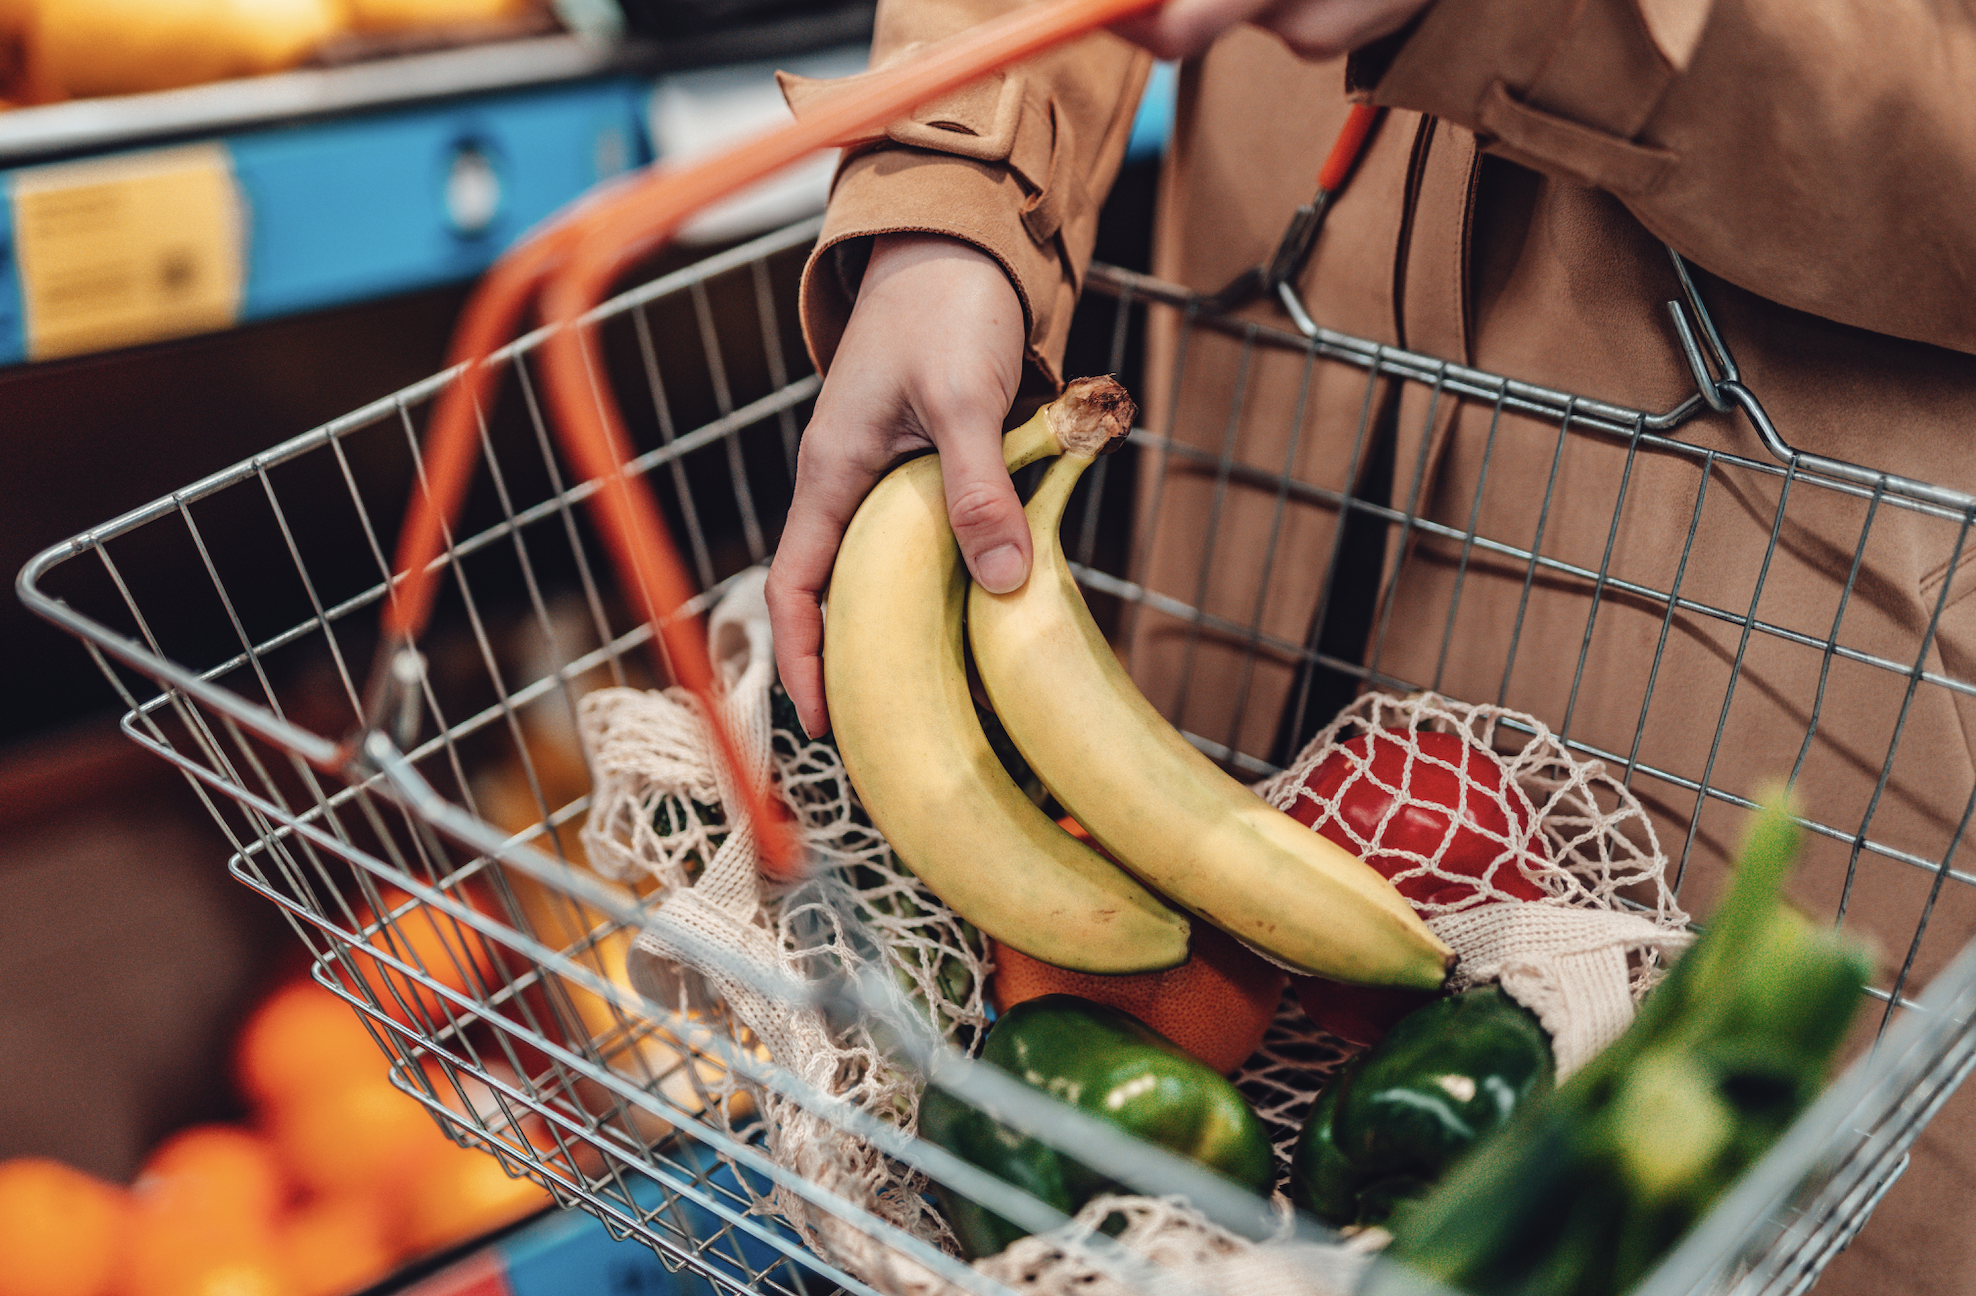 Person shopping, placing bananas into a metal basket with various other groceries